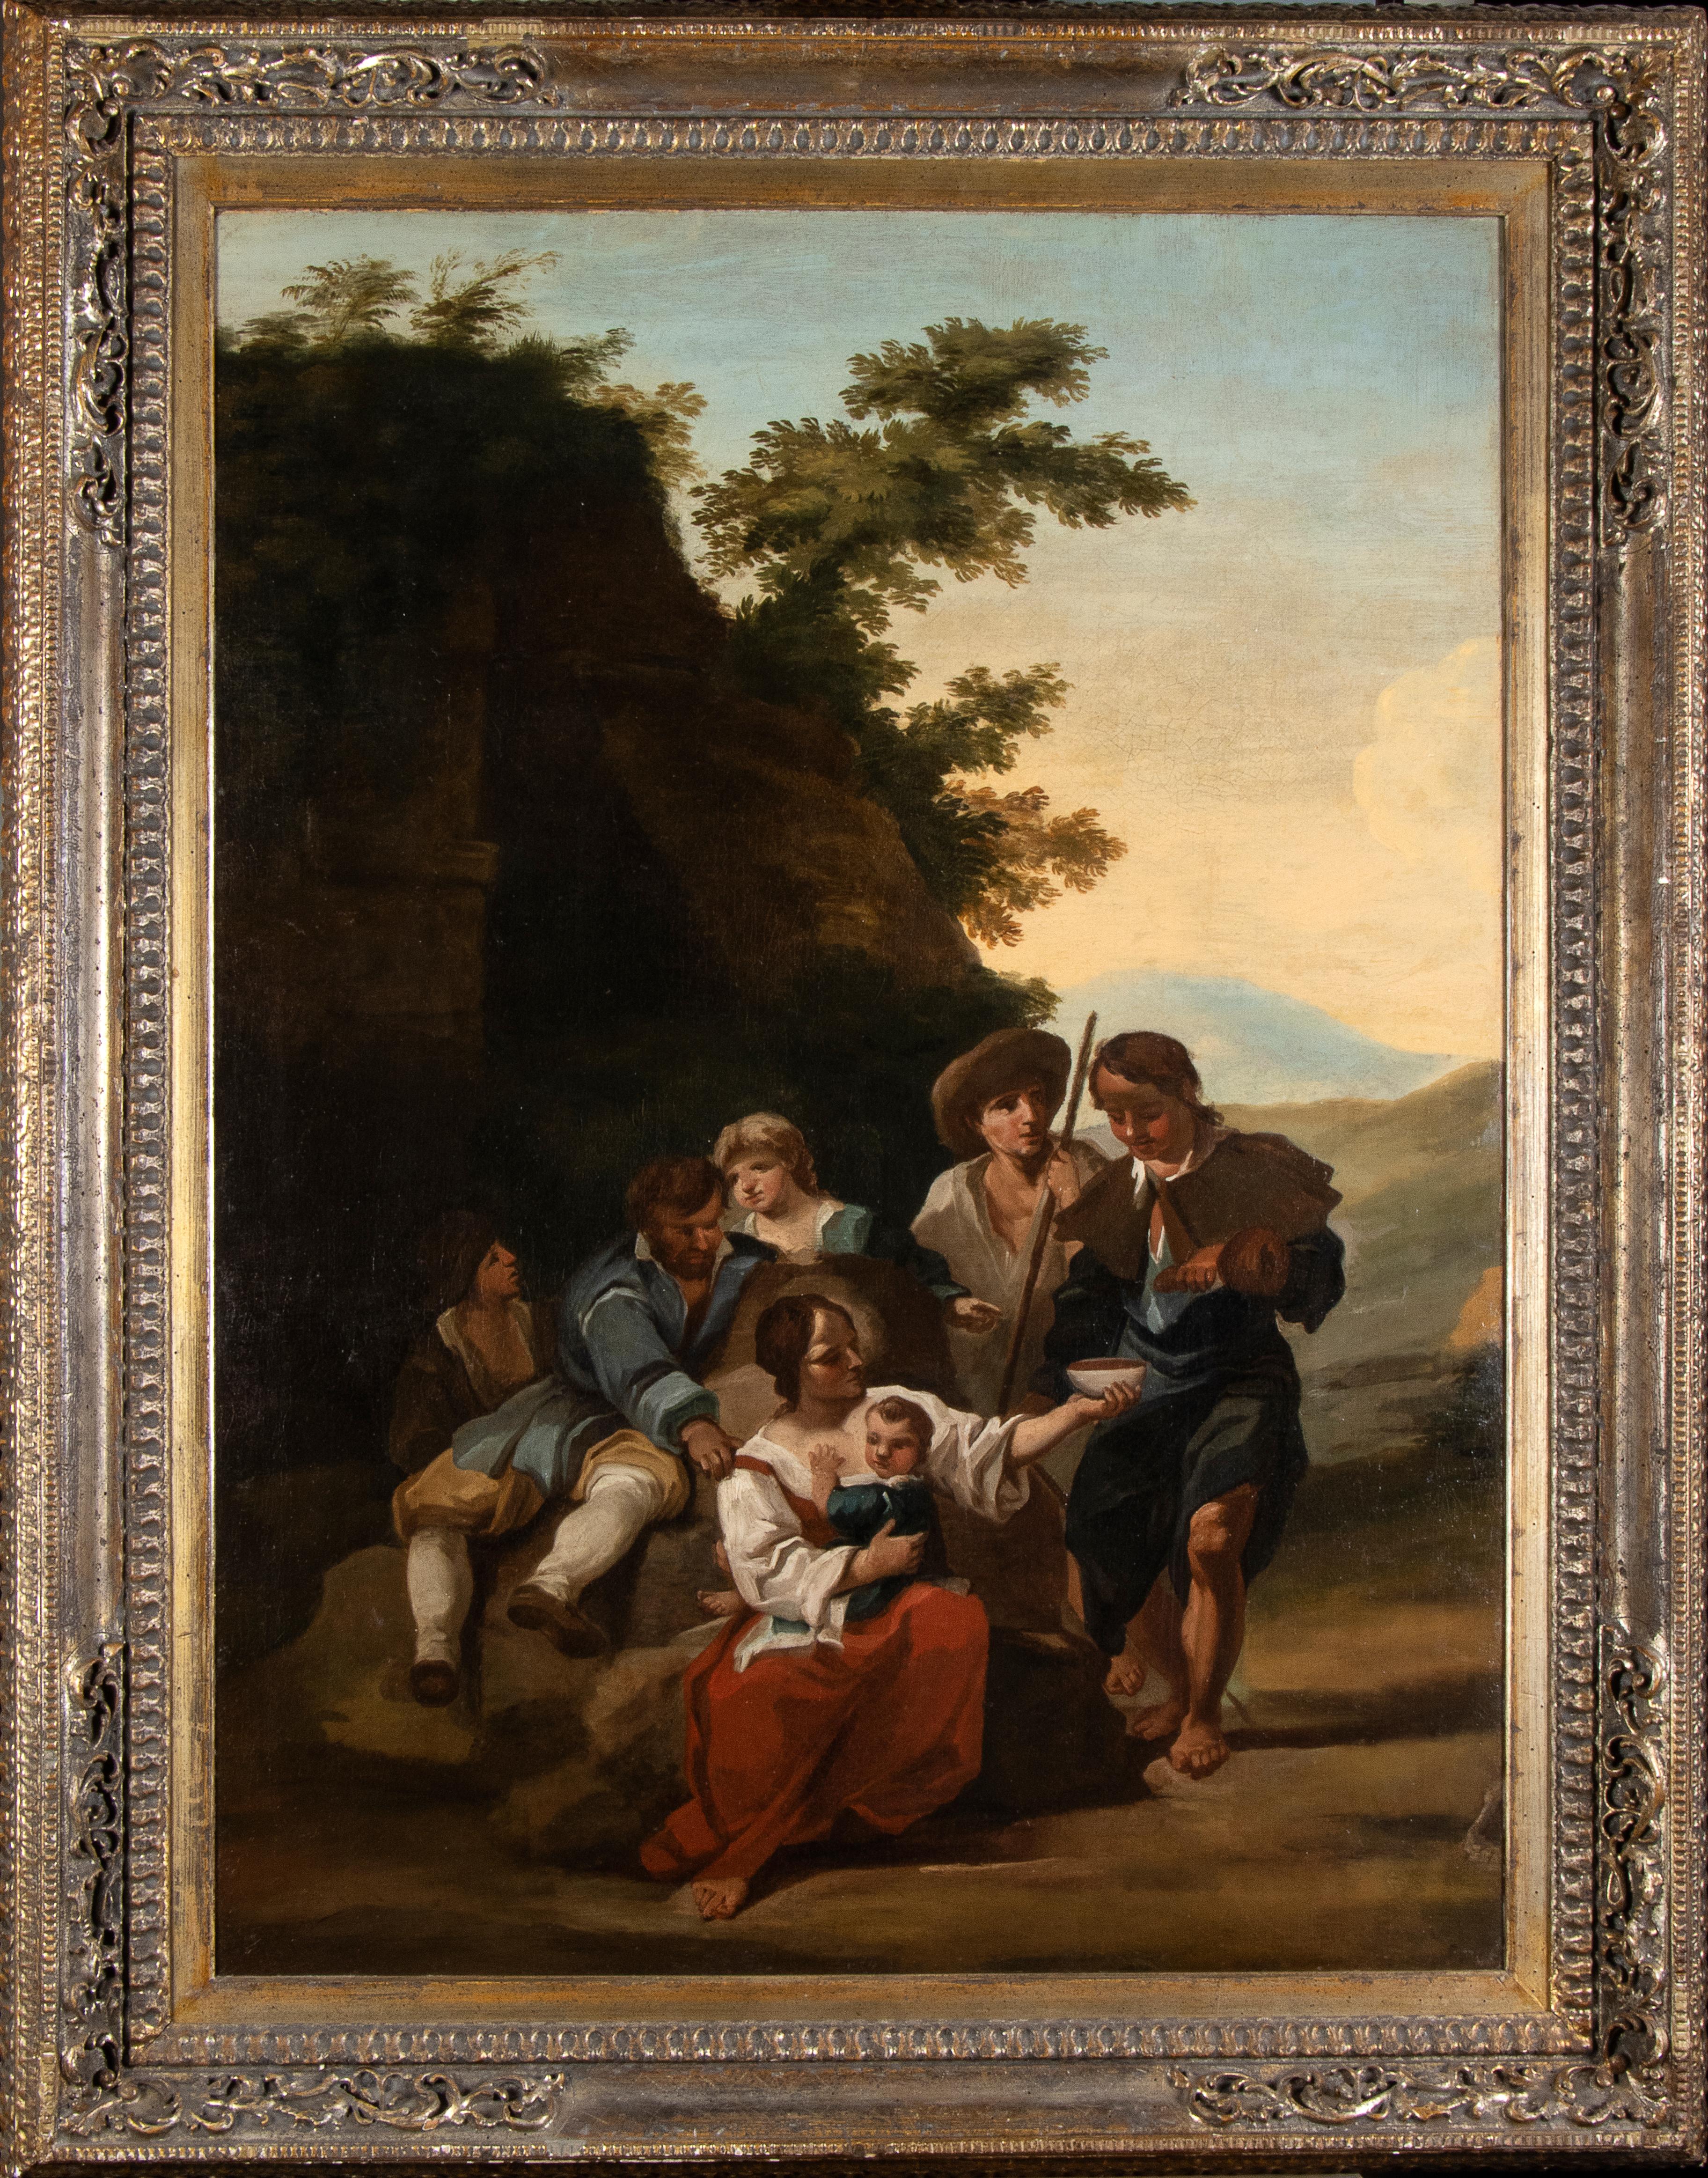 Thepainting accompanied by an expertise drawn up by prof Ferdinando Arisi that wrote:
This pilgrims' stop is a typical work of Paolo Monaldi active in Rome between 1730 and 1770 in the wake of Locatelli.
The points of contact with his documented